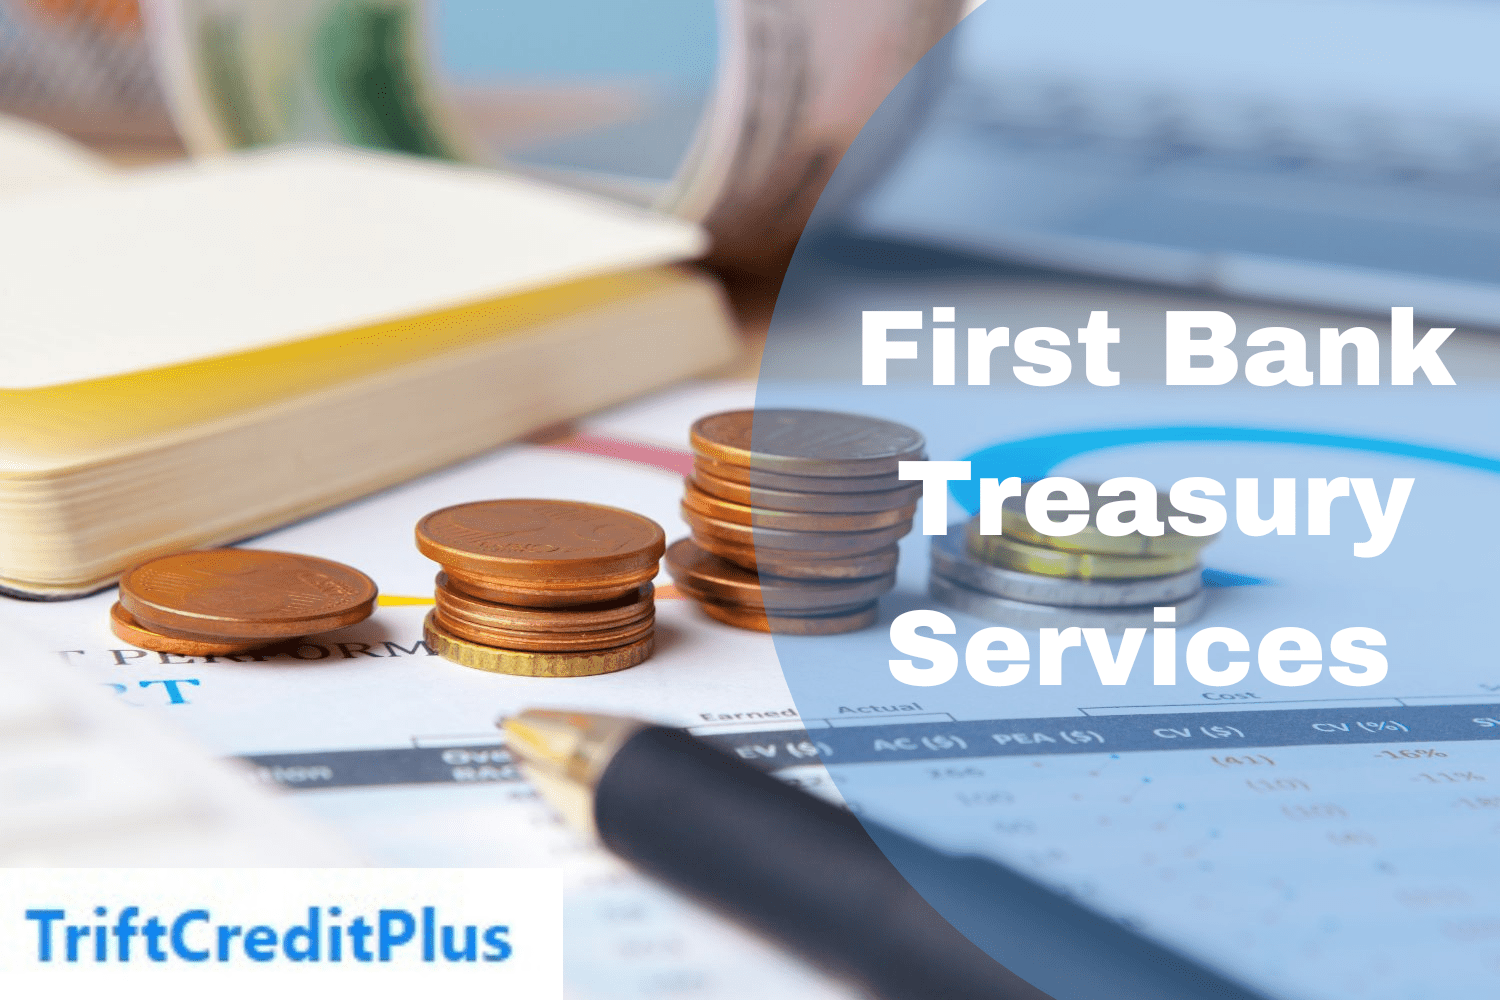 First Bank Treasury Services